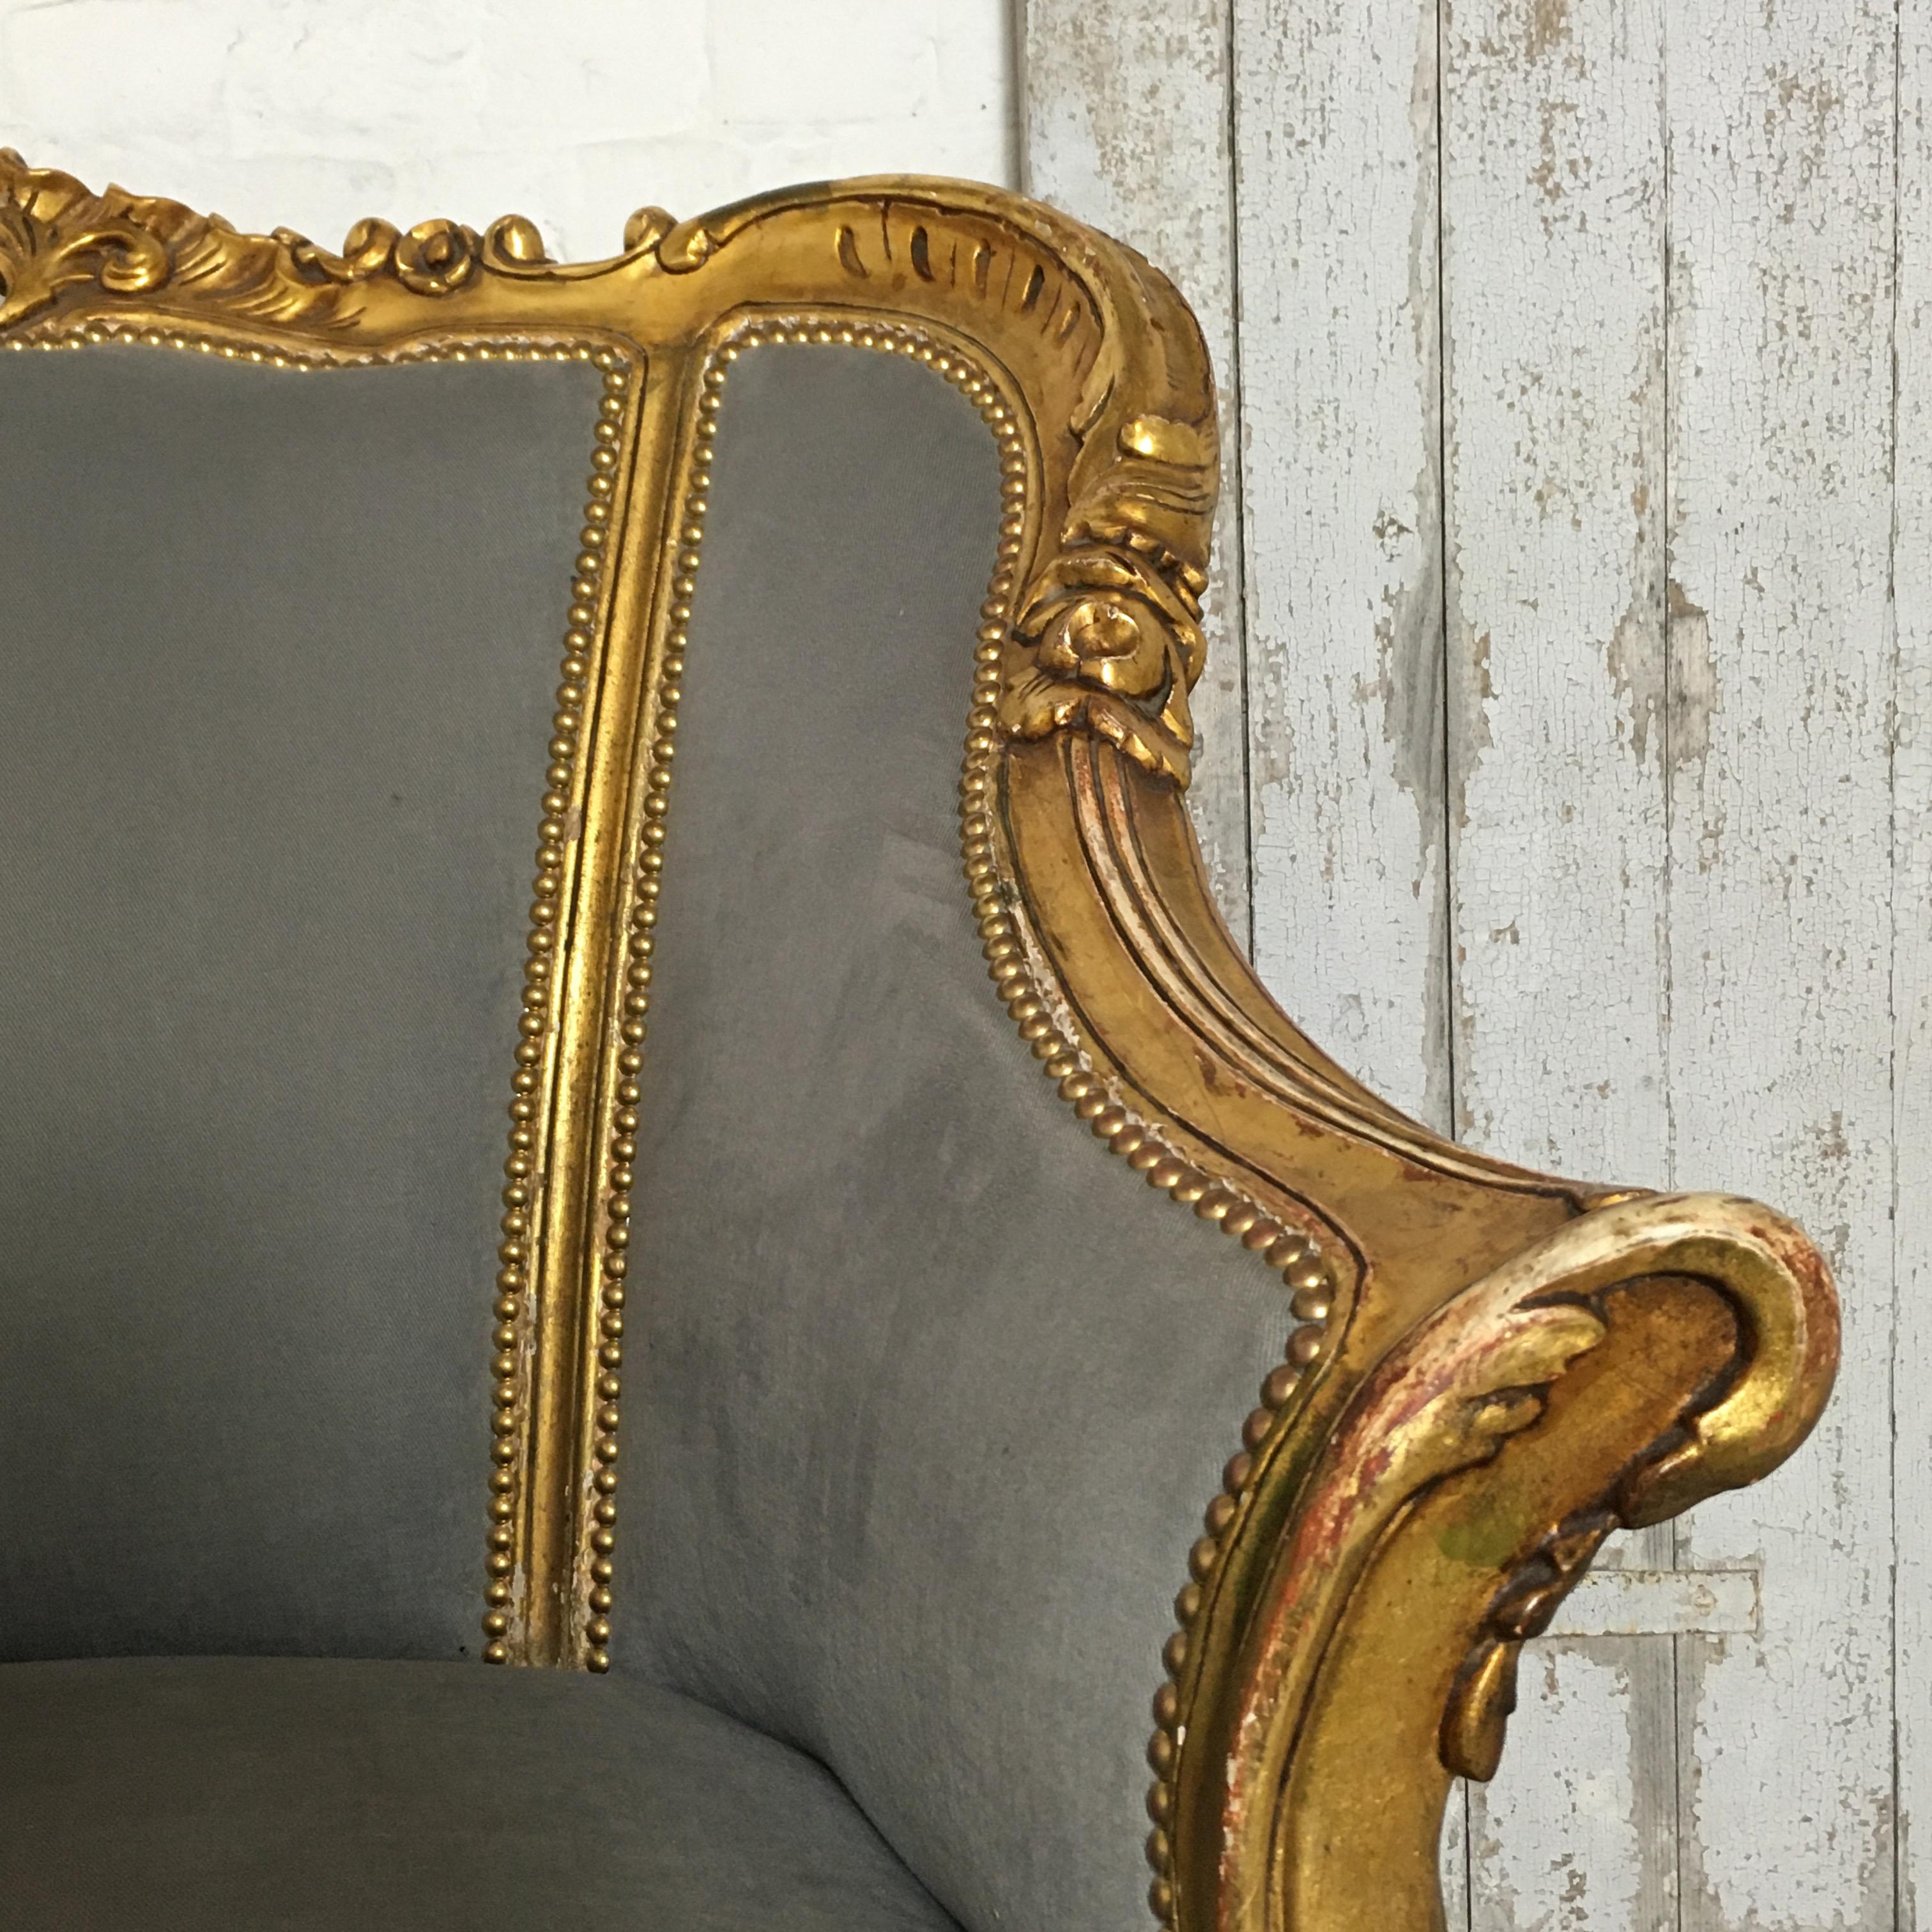 Pair of French Louis XVI style bergère chairs
Beautifully carved and gilded wooden frames, some of the gilt has worn with age and use
The chairs have been re-upholstered, the straw inner is still in place at the wings, back and arms of the